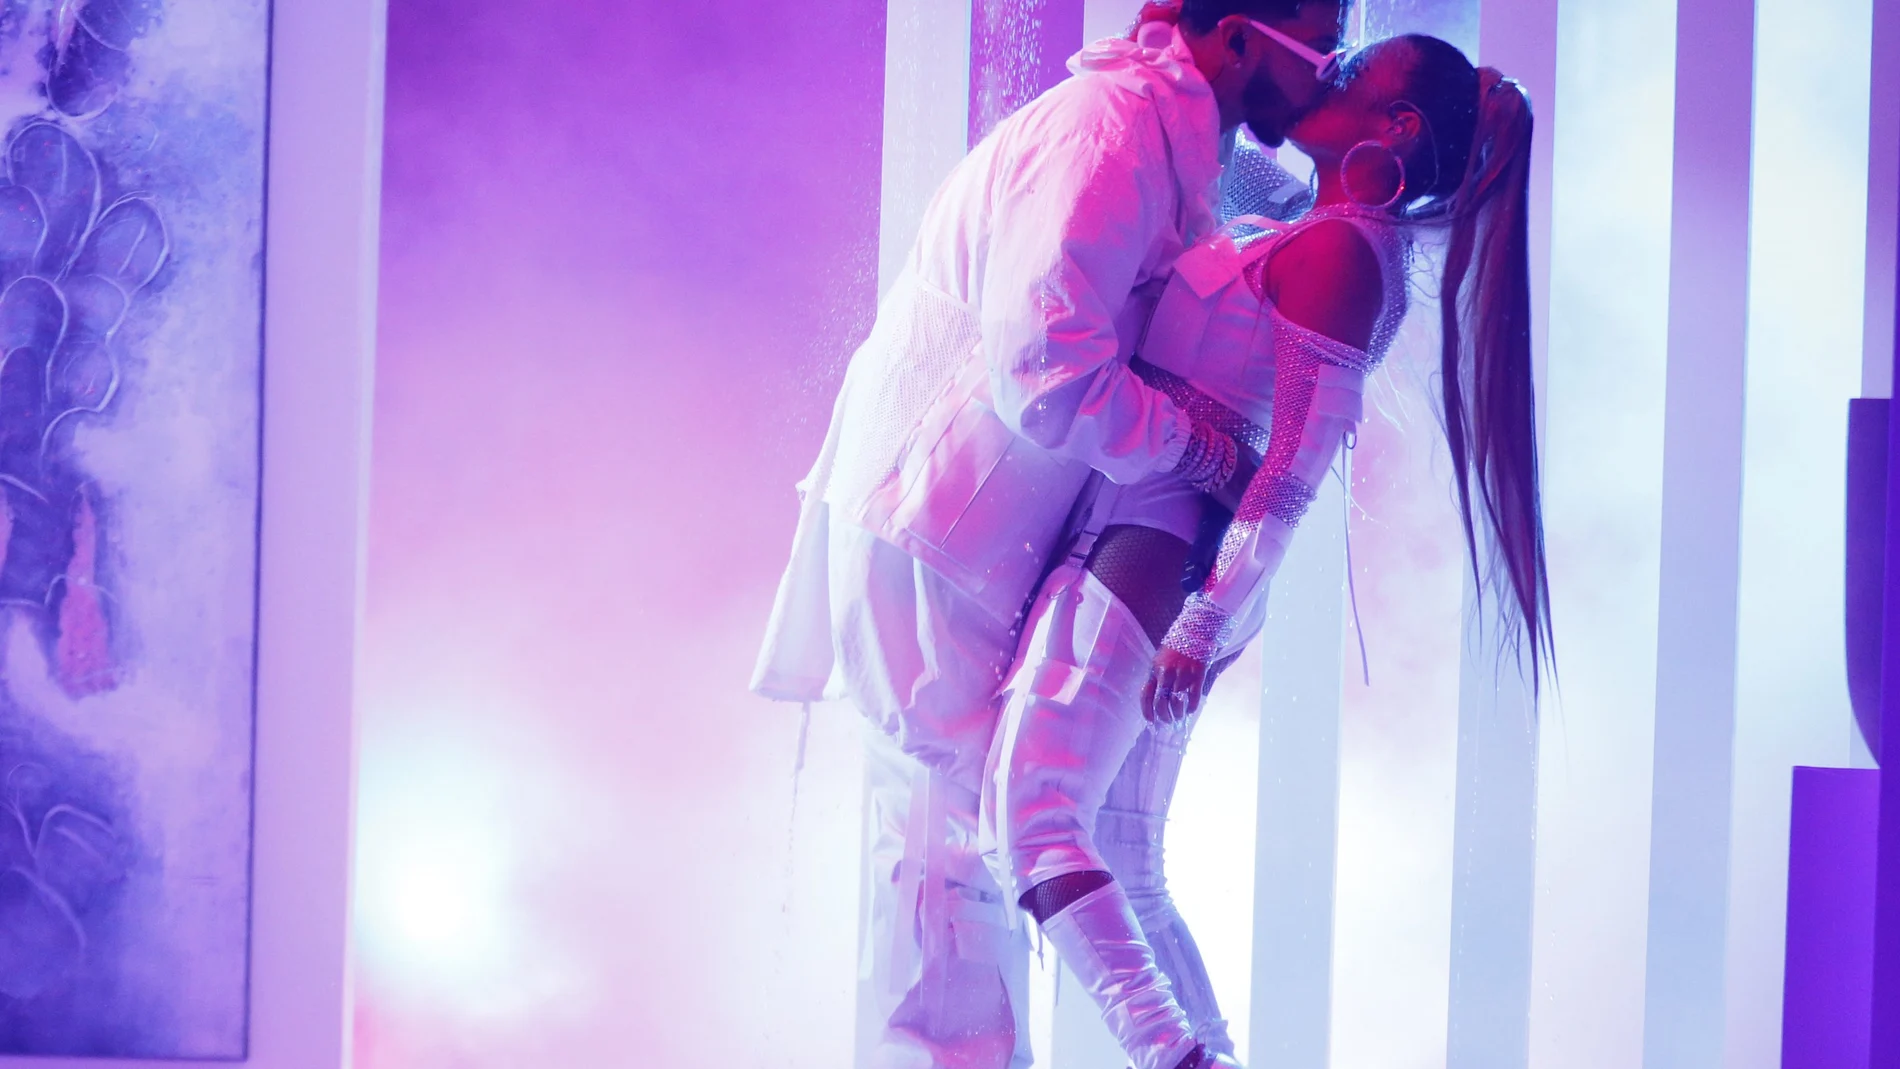 FILE - Anuel AA, left, kisses Karol G as they perform a medley at the Billboard Latin Music Awards in Las Vegas on April 25, 2019. Karol G. has four Latin Grammy nominations, including two shared with Nicki Minaj. Karol Gâ€™s fiancÃ©, Puerto Rican rapper-singer Anuel AA, marked a major breakthrough this year as a first-time nominee. He scored seven nominations, including a bid for best new artist. (Photo by Eric Jamison/Invision/AP, File)